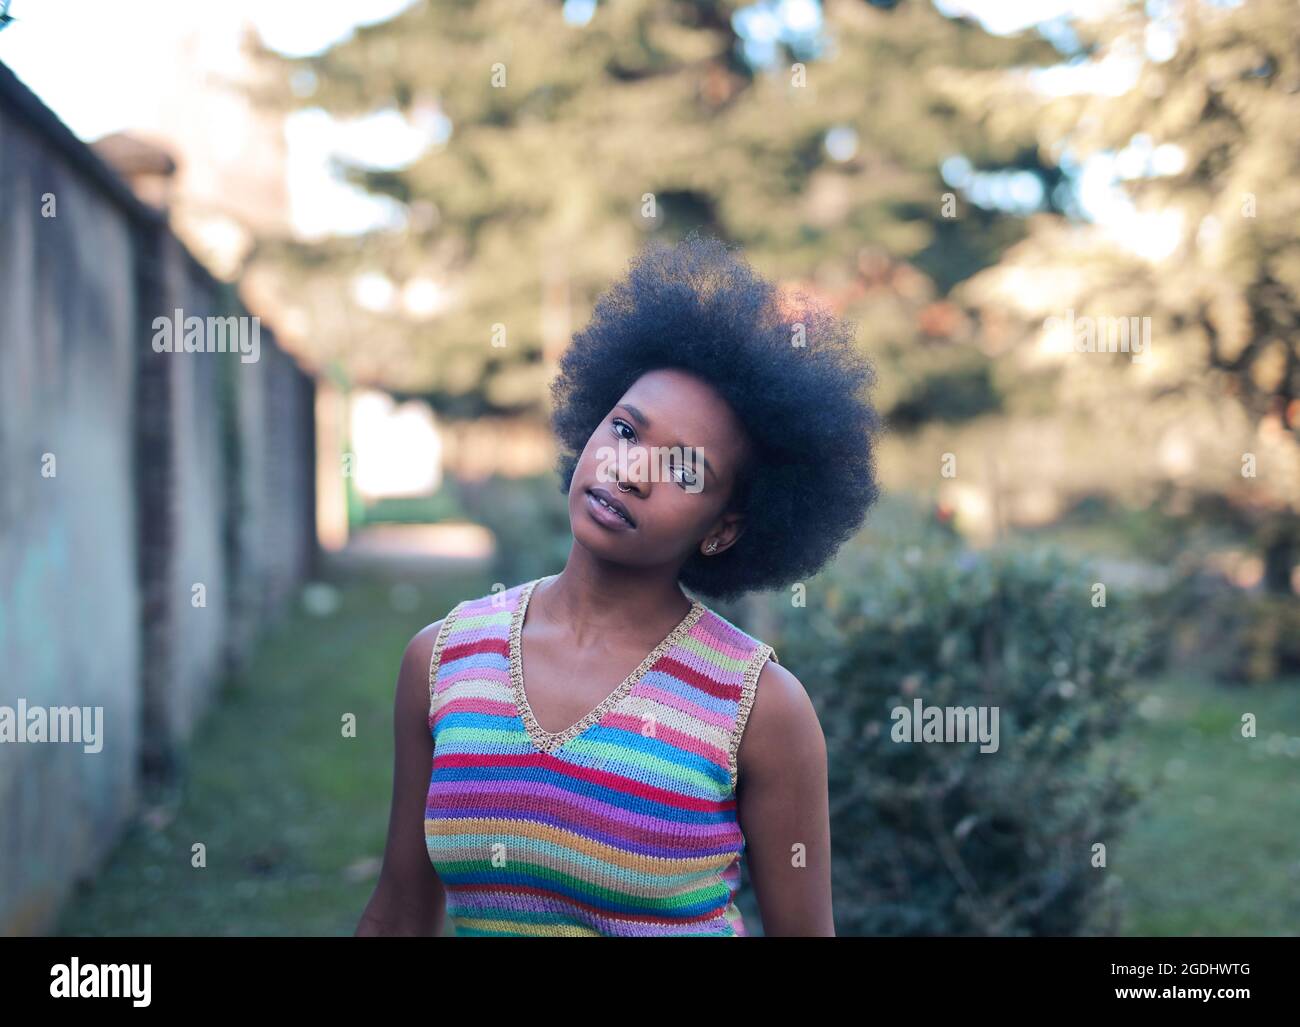 portrait of a young black woman Stock Photo